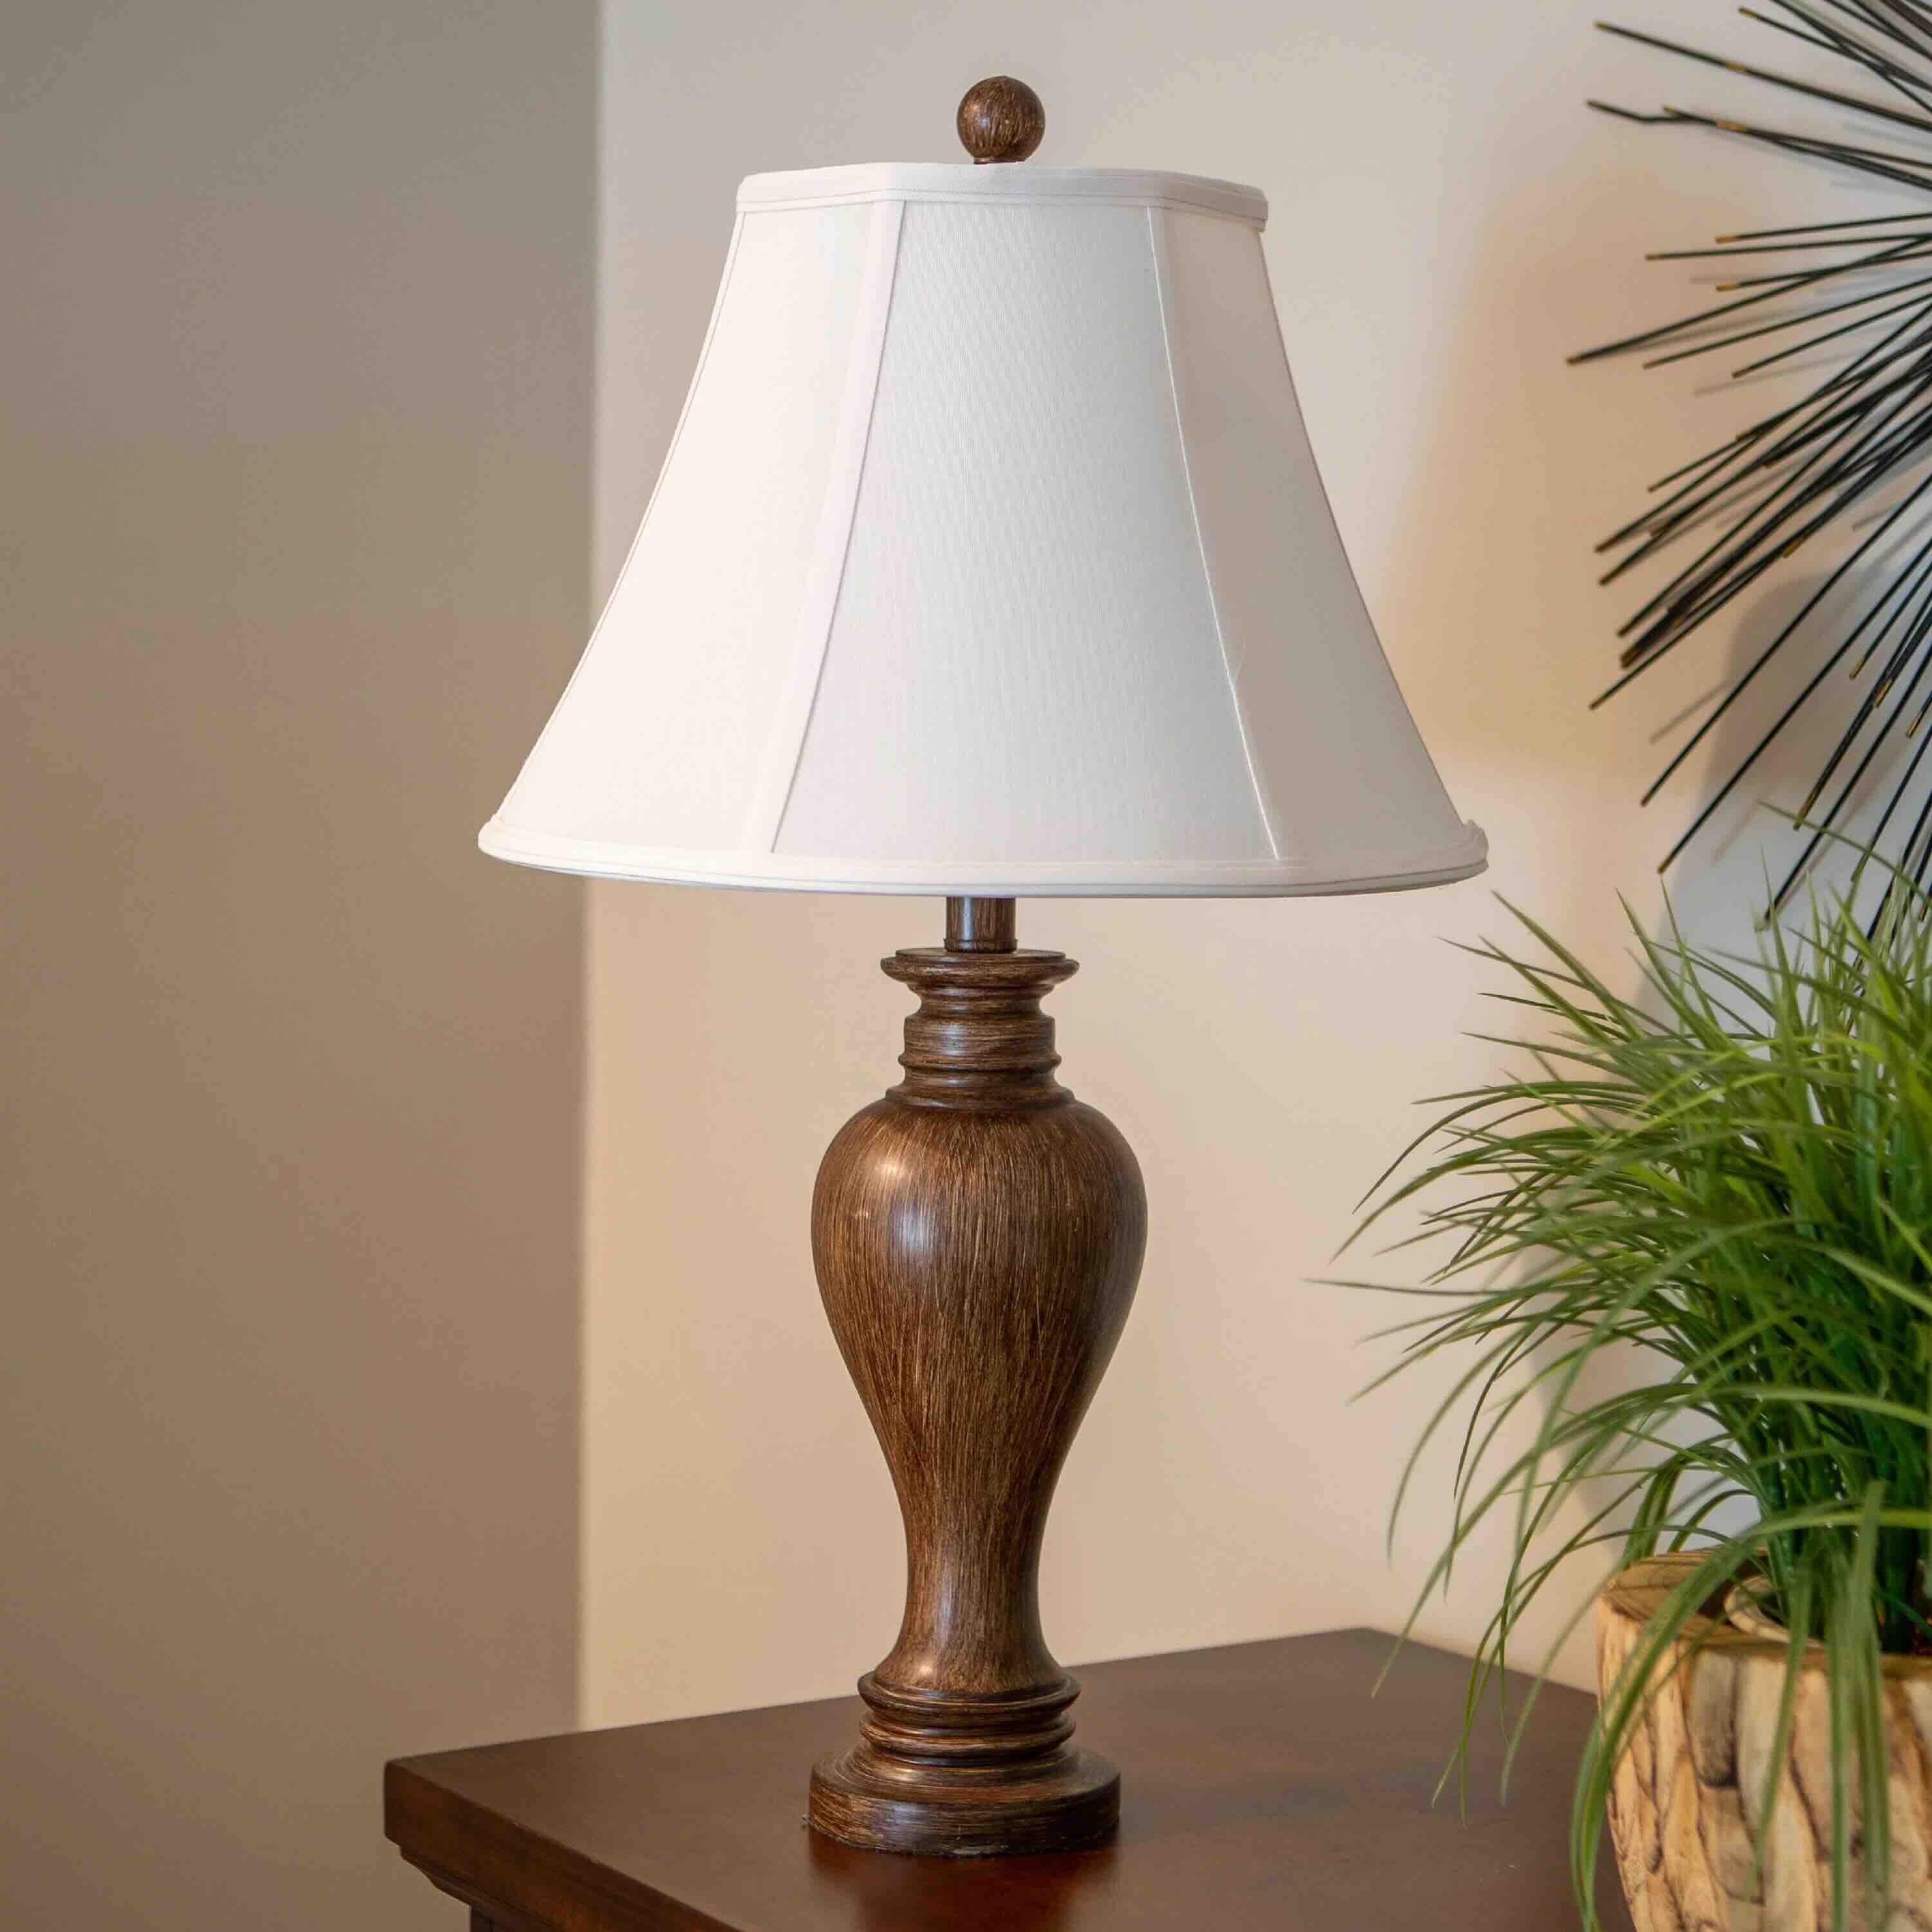 How Tall Should A Table Lamp Be